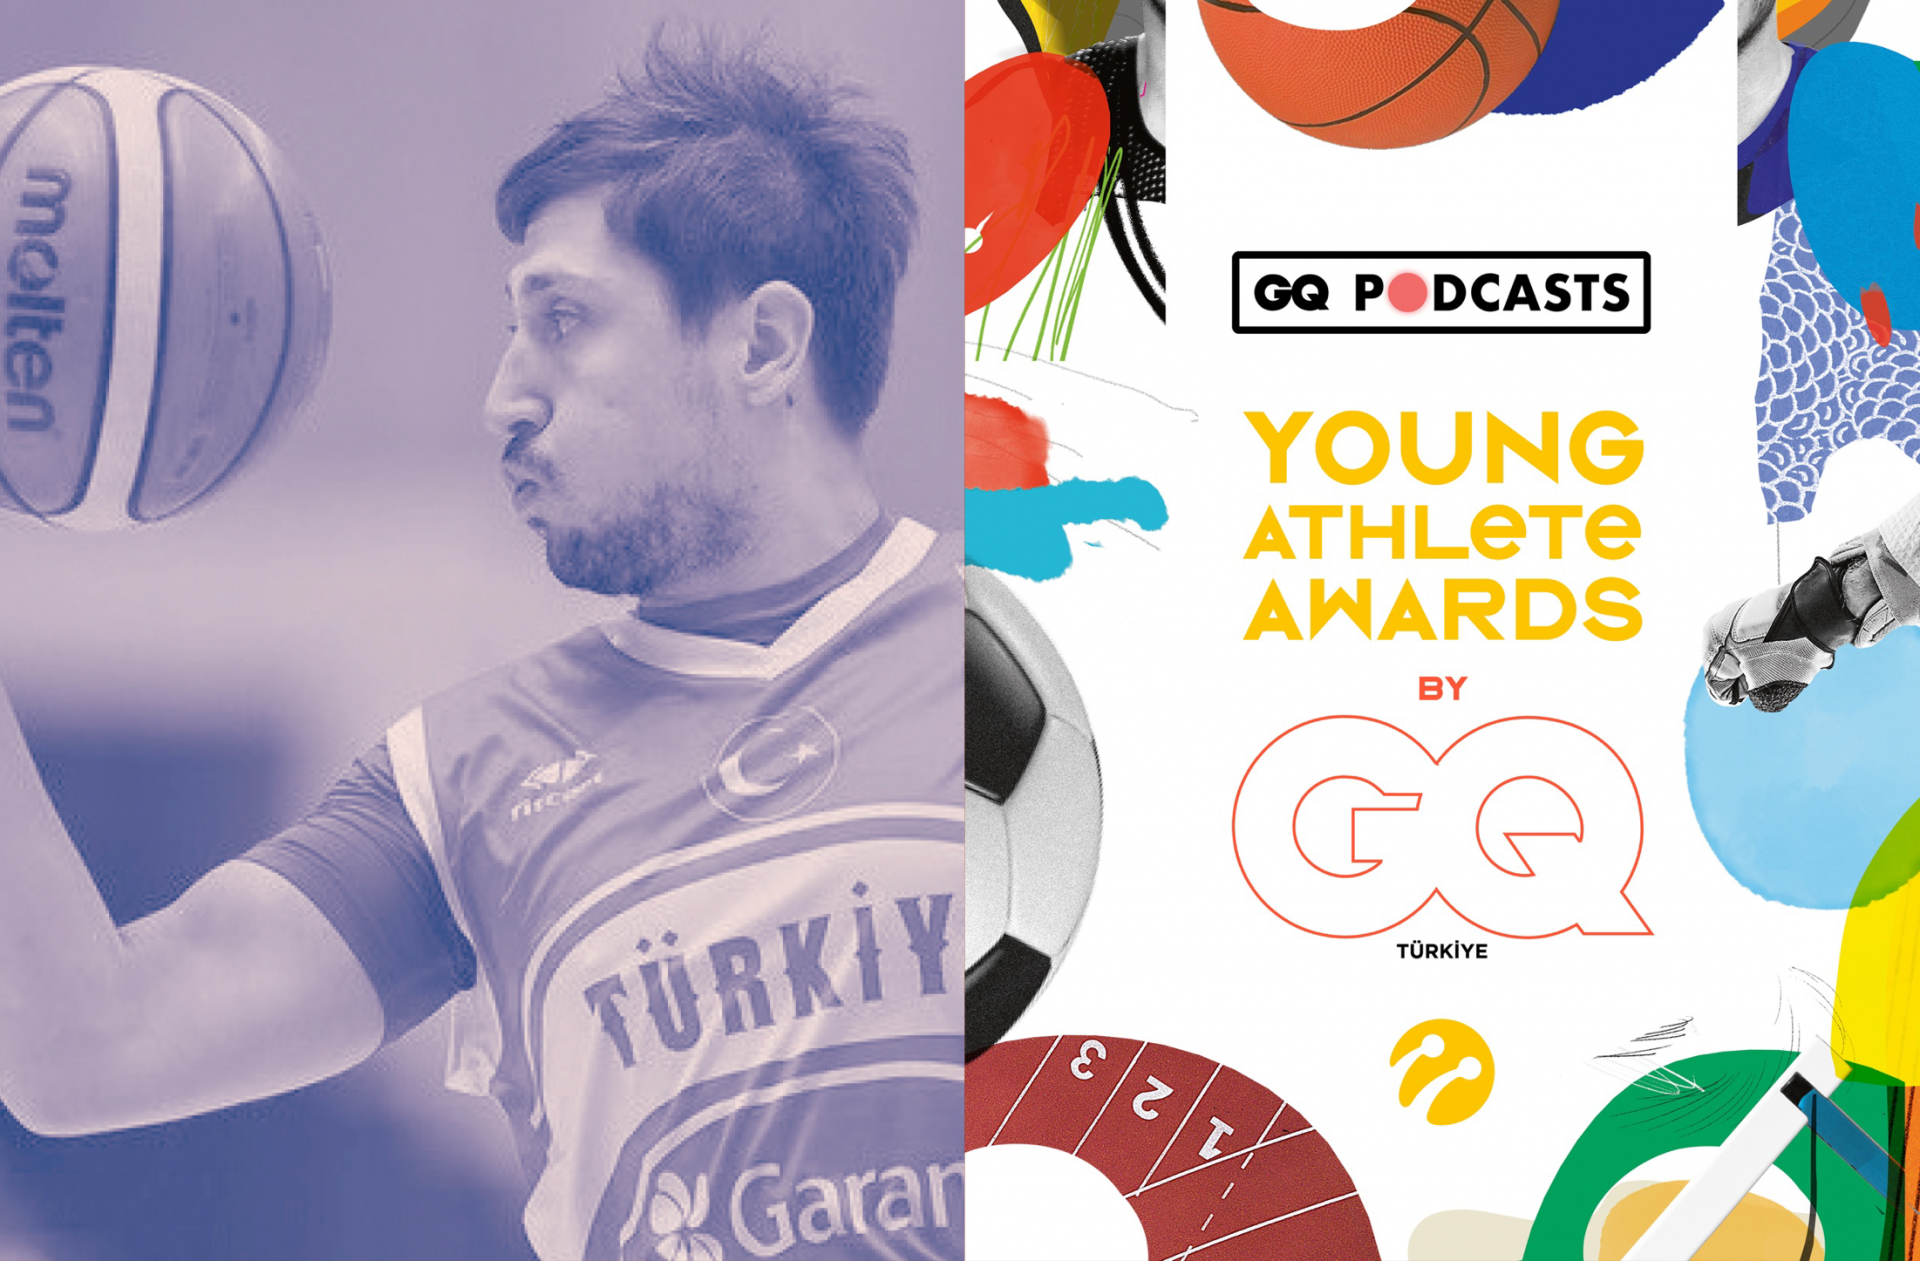 Uğur Toprak | GQ Podcasts: Young Athlete Awards